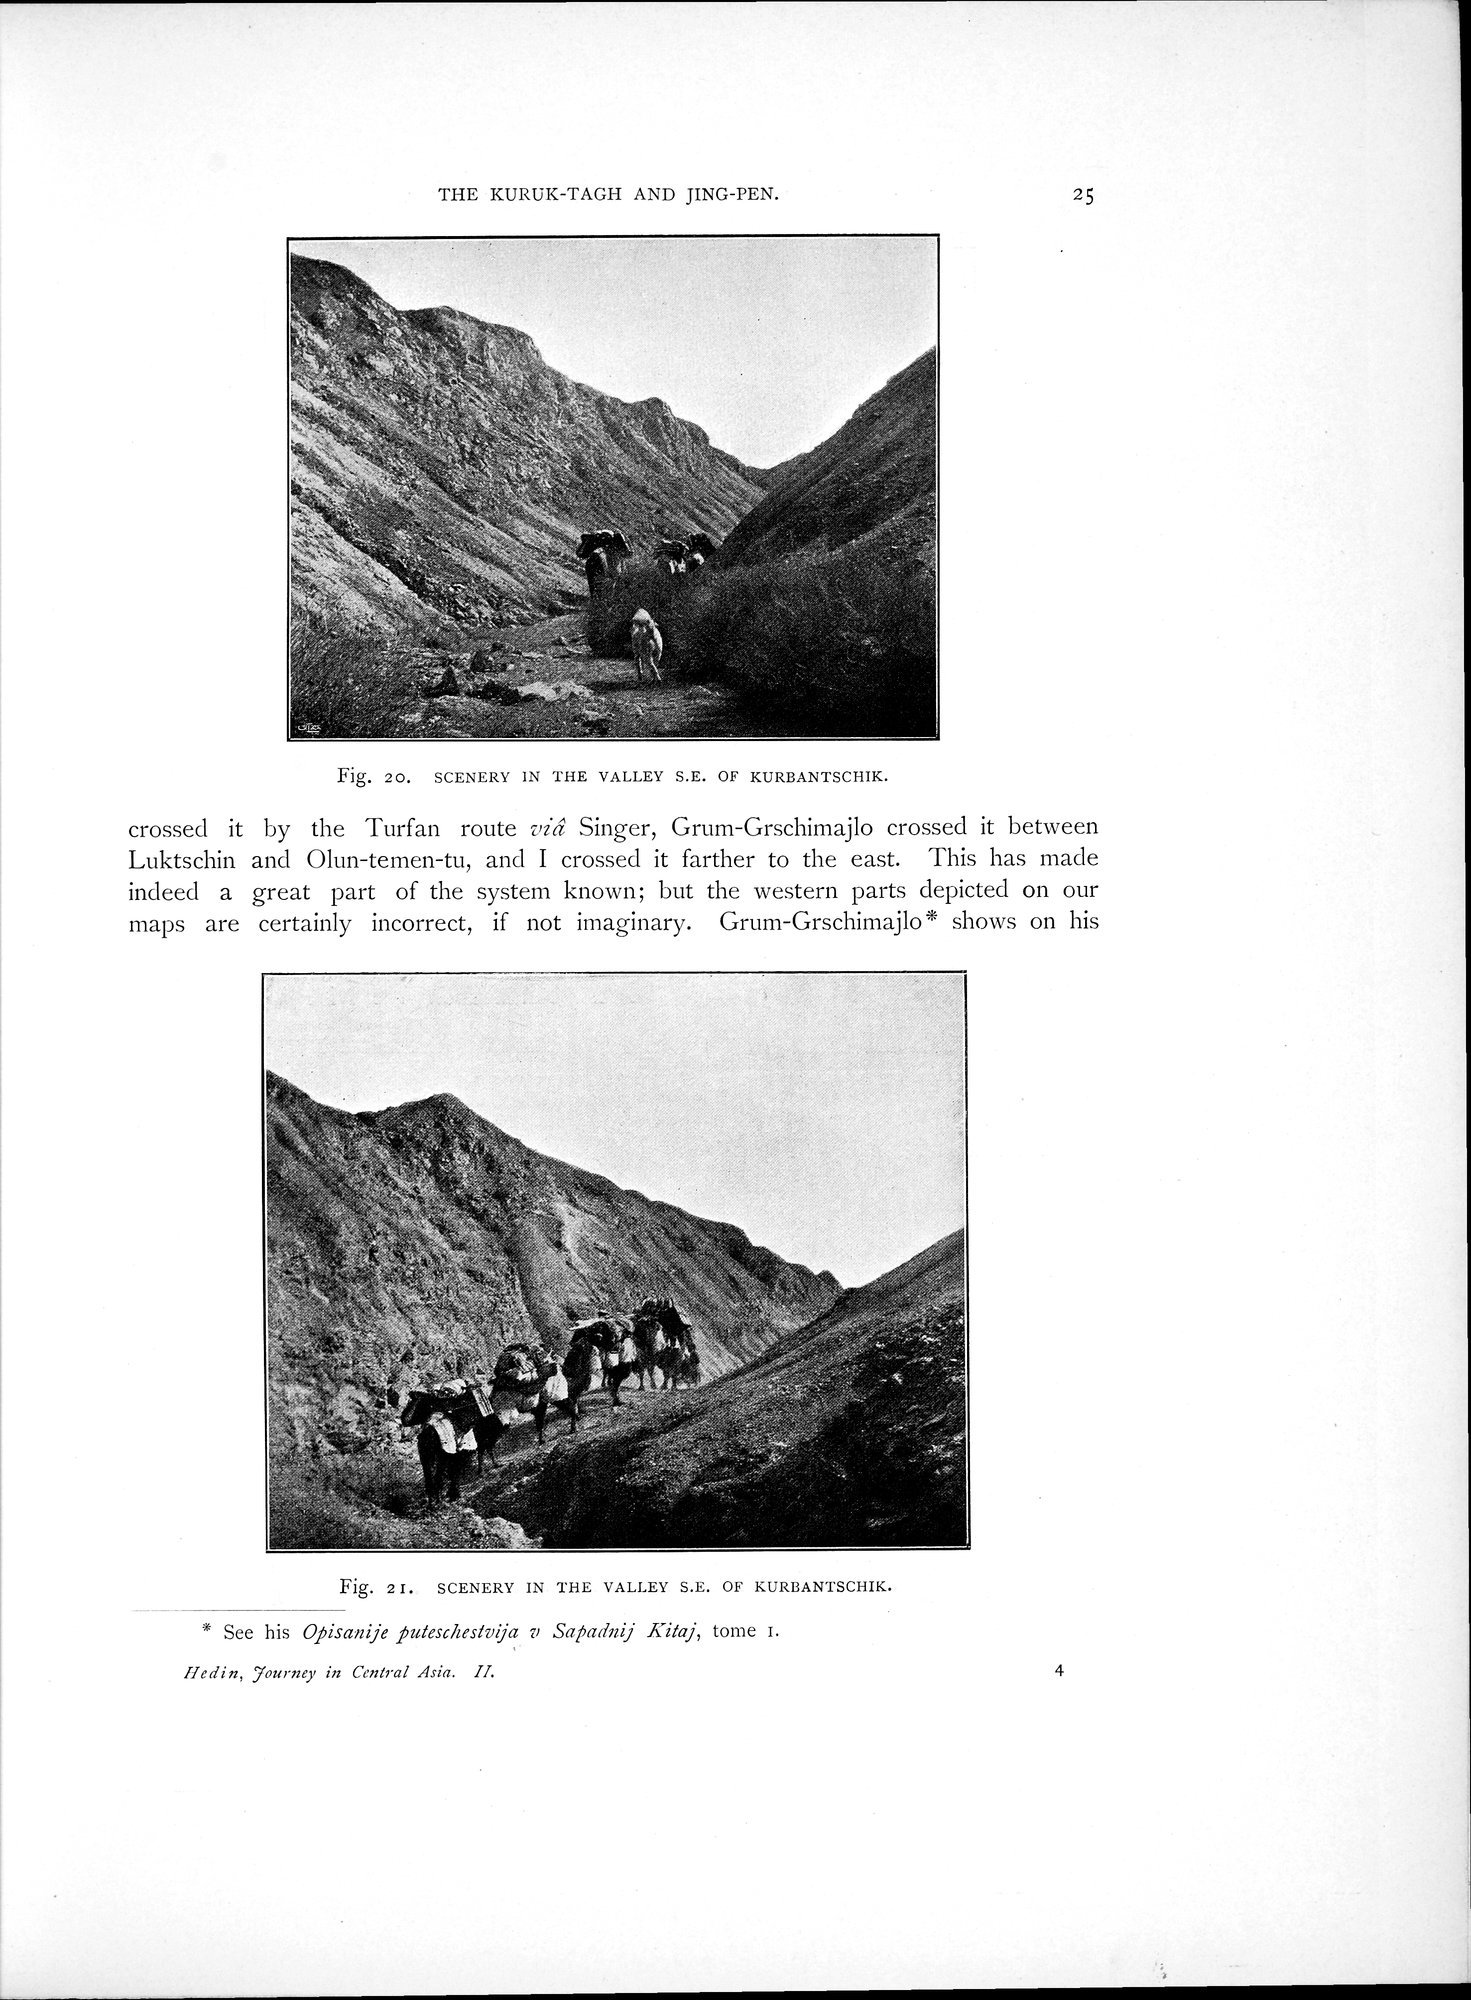 Scientific Results of a Journey in Central Asia, 1899-1902 : vol.2 / 39 ページ（白黒高解像度画像）